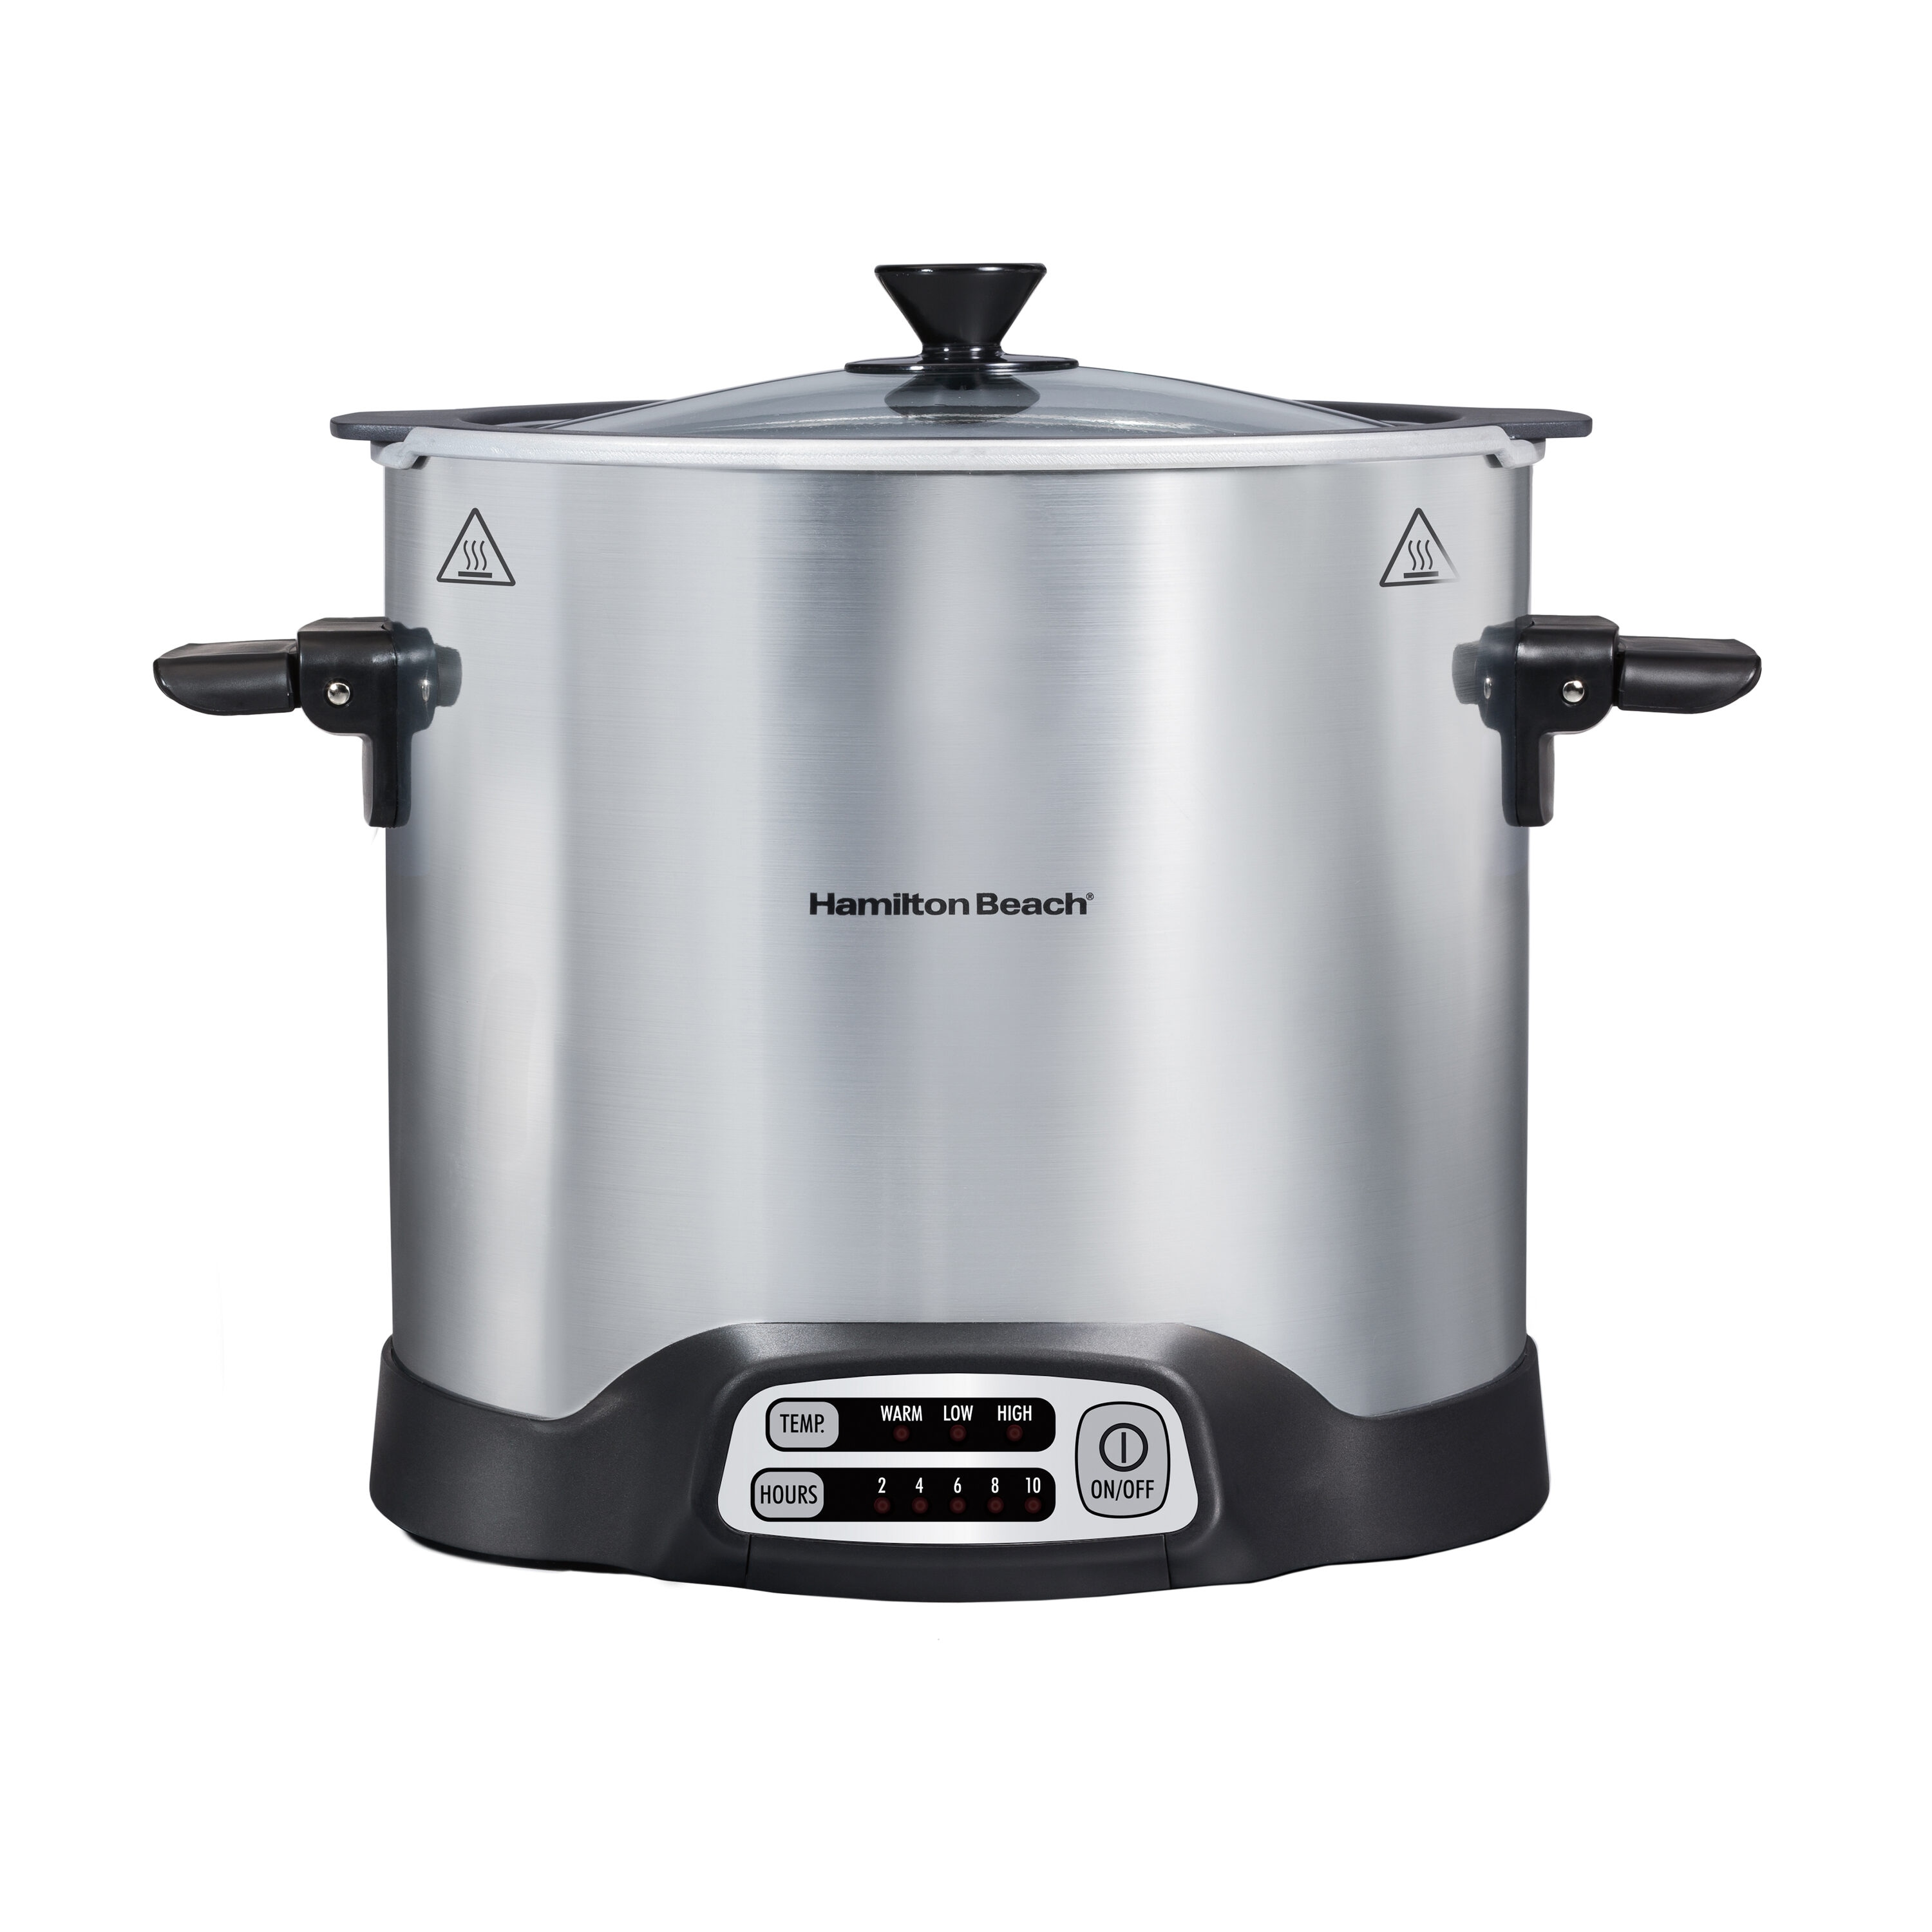 Chef'sChoice 6-Quart Stainless Steel Rectangle Slow Cooker | VCCC20SS13